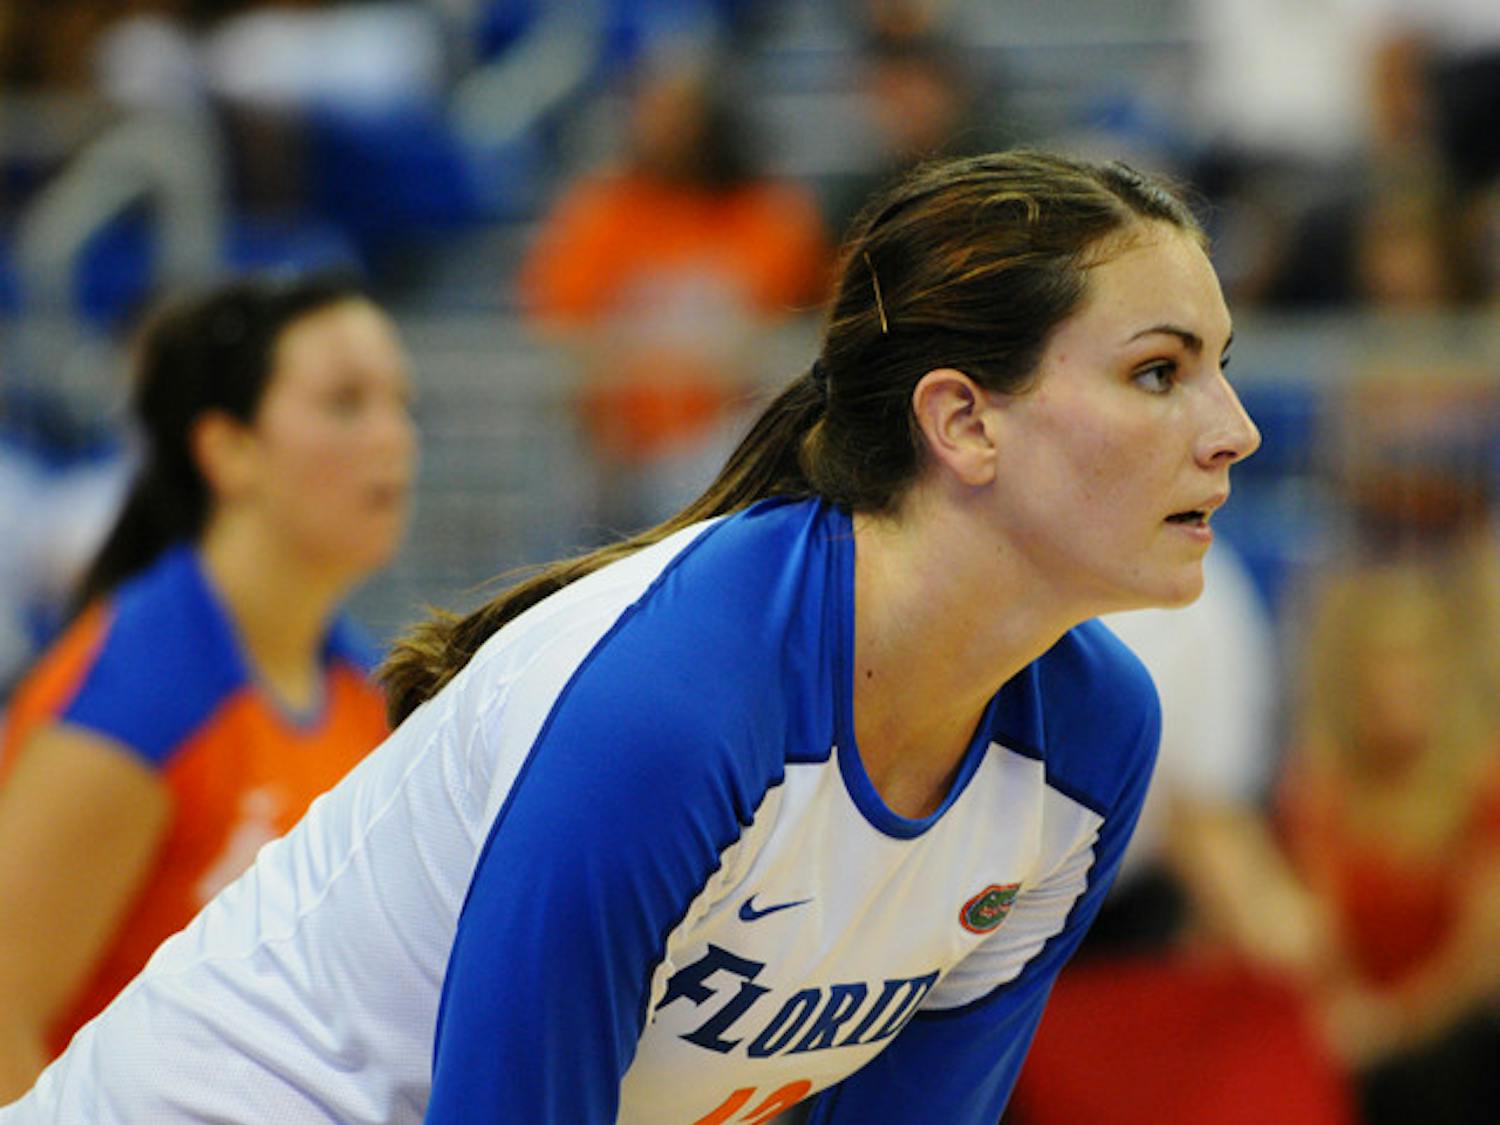 Florida senior Kelly Murphy recorded 83 assists and 27 kills in the last four games while playing a hybrid setter/outside-hitter role for the No. 13 Gators.
&nbsp;